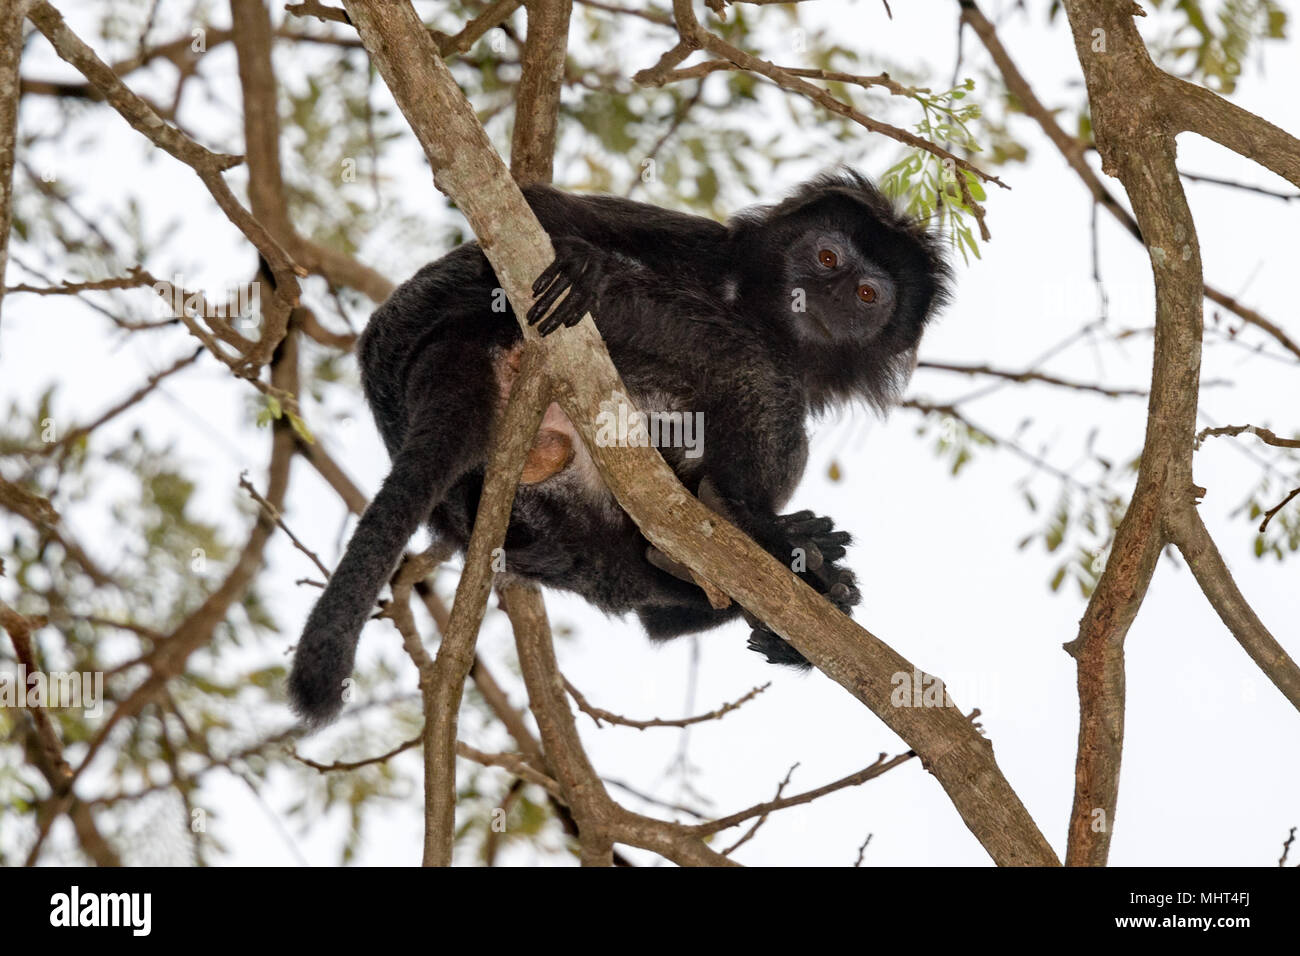 black crested macaque monkey ape close up portrait looking at you from a tree Stock Photo